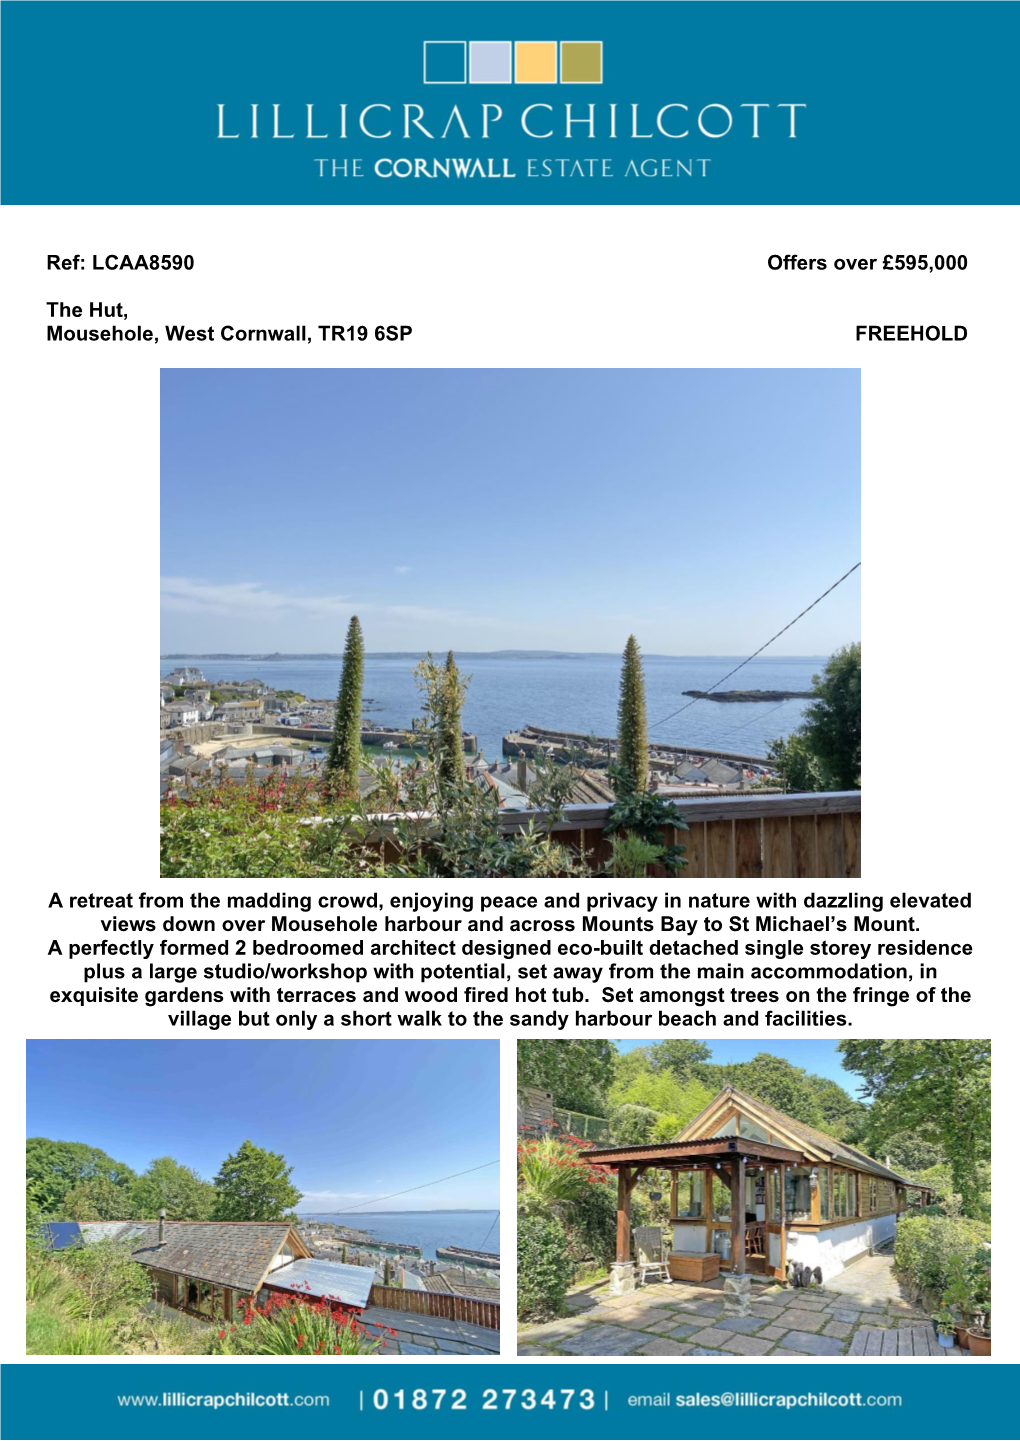 Ref: LCAA8590 Offers Over £595000 the Hut, Mousehole, West